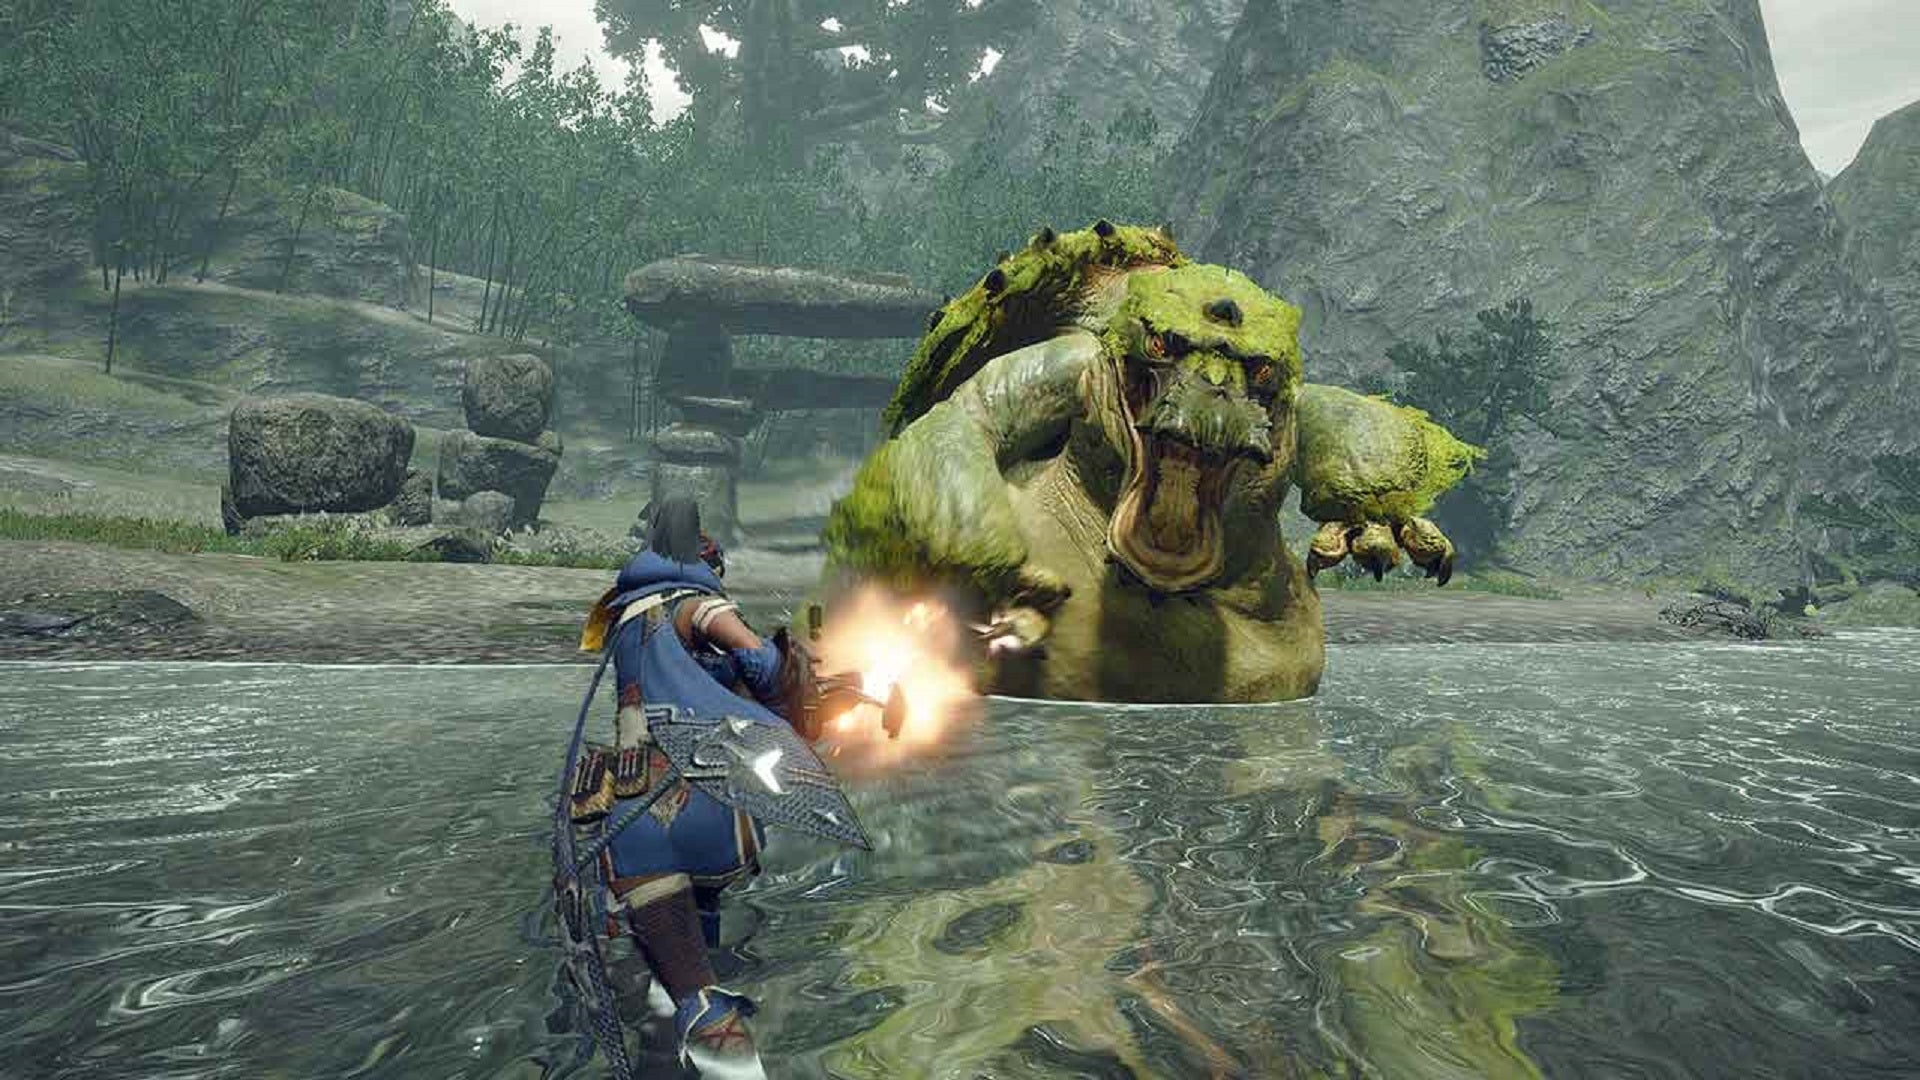 A Monster Hunter Rise character fights a giant creature in a body of water.